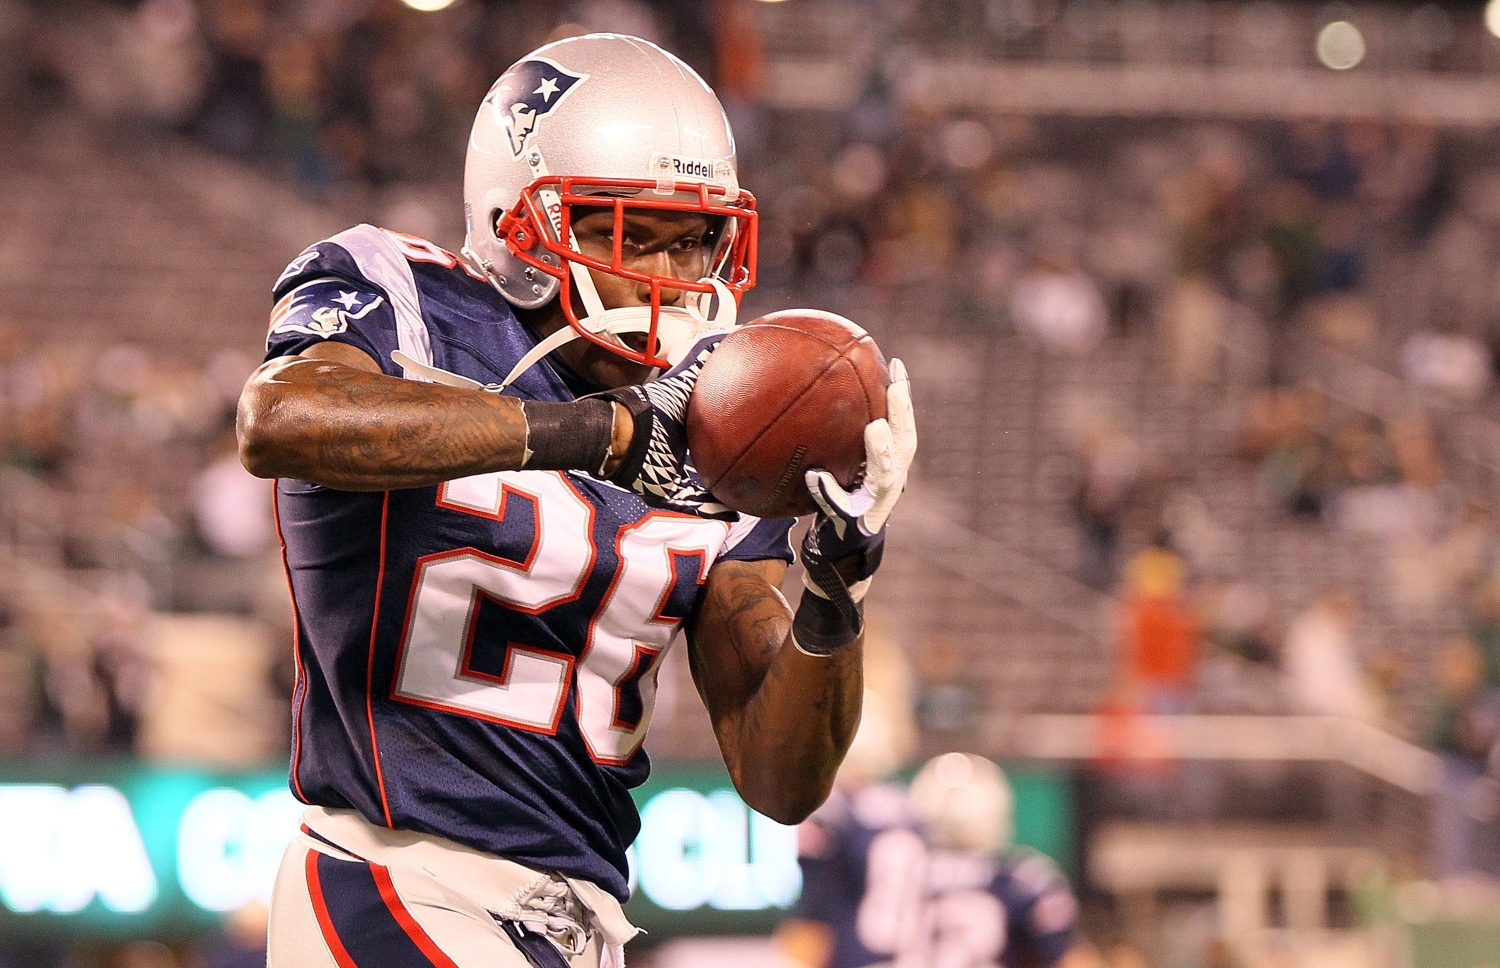 Phillip Adams catches a ball while warming up before a game during his brief time with the New England Patriots.